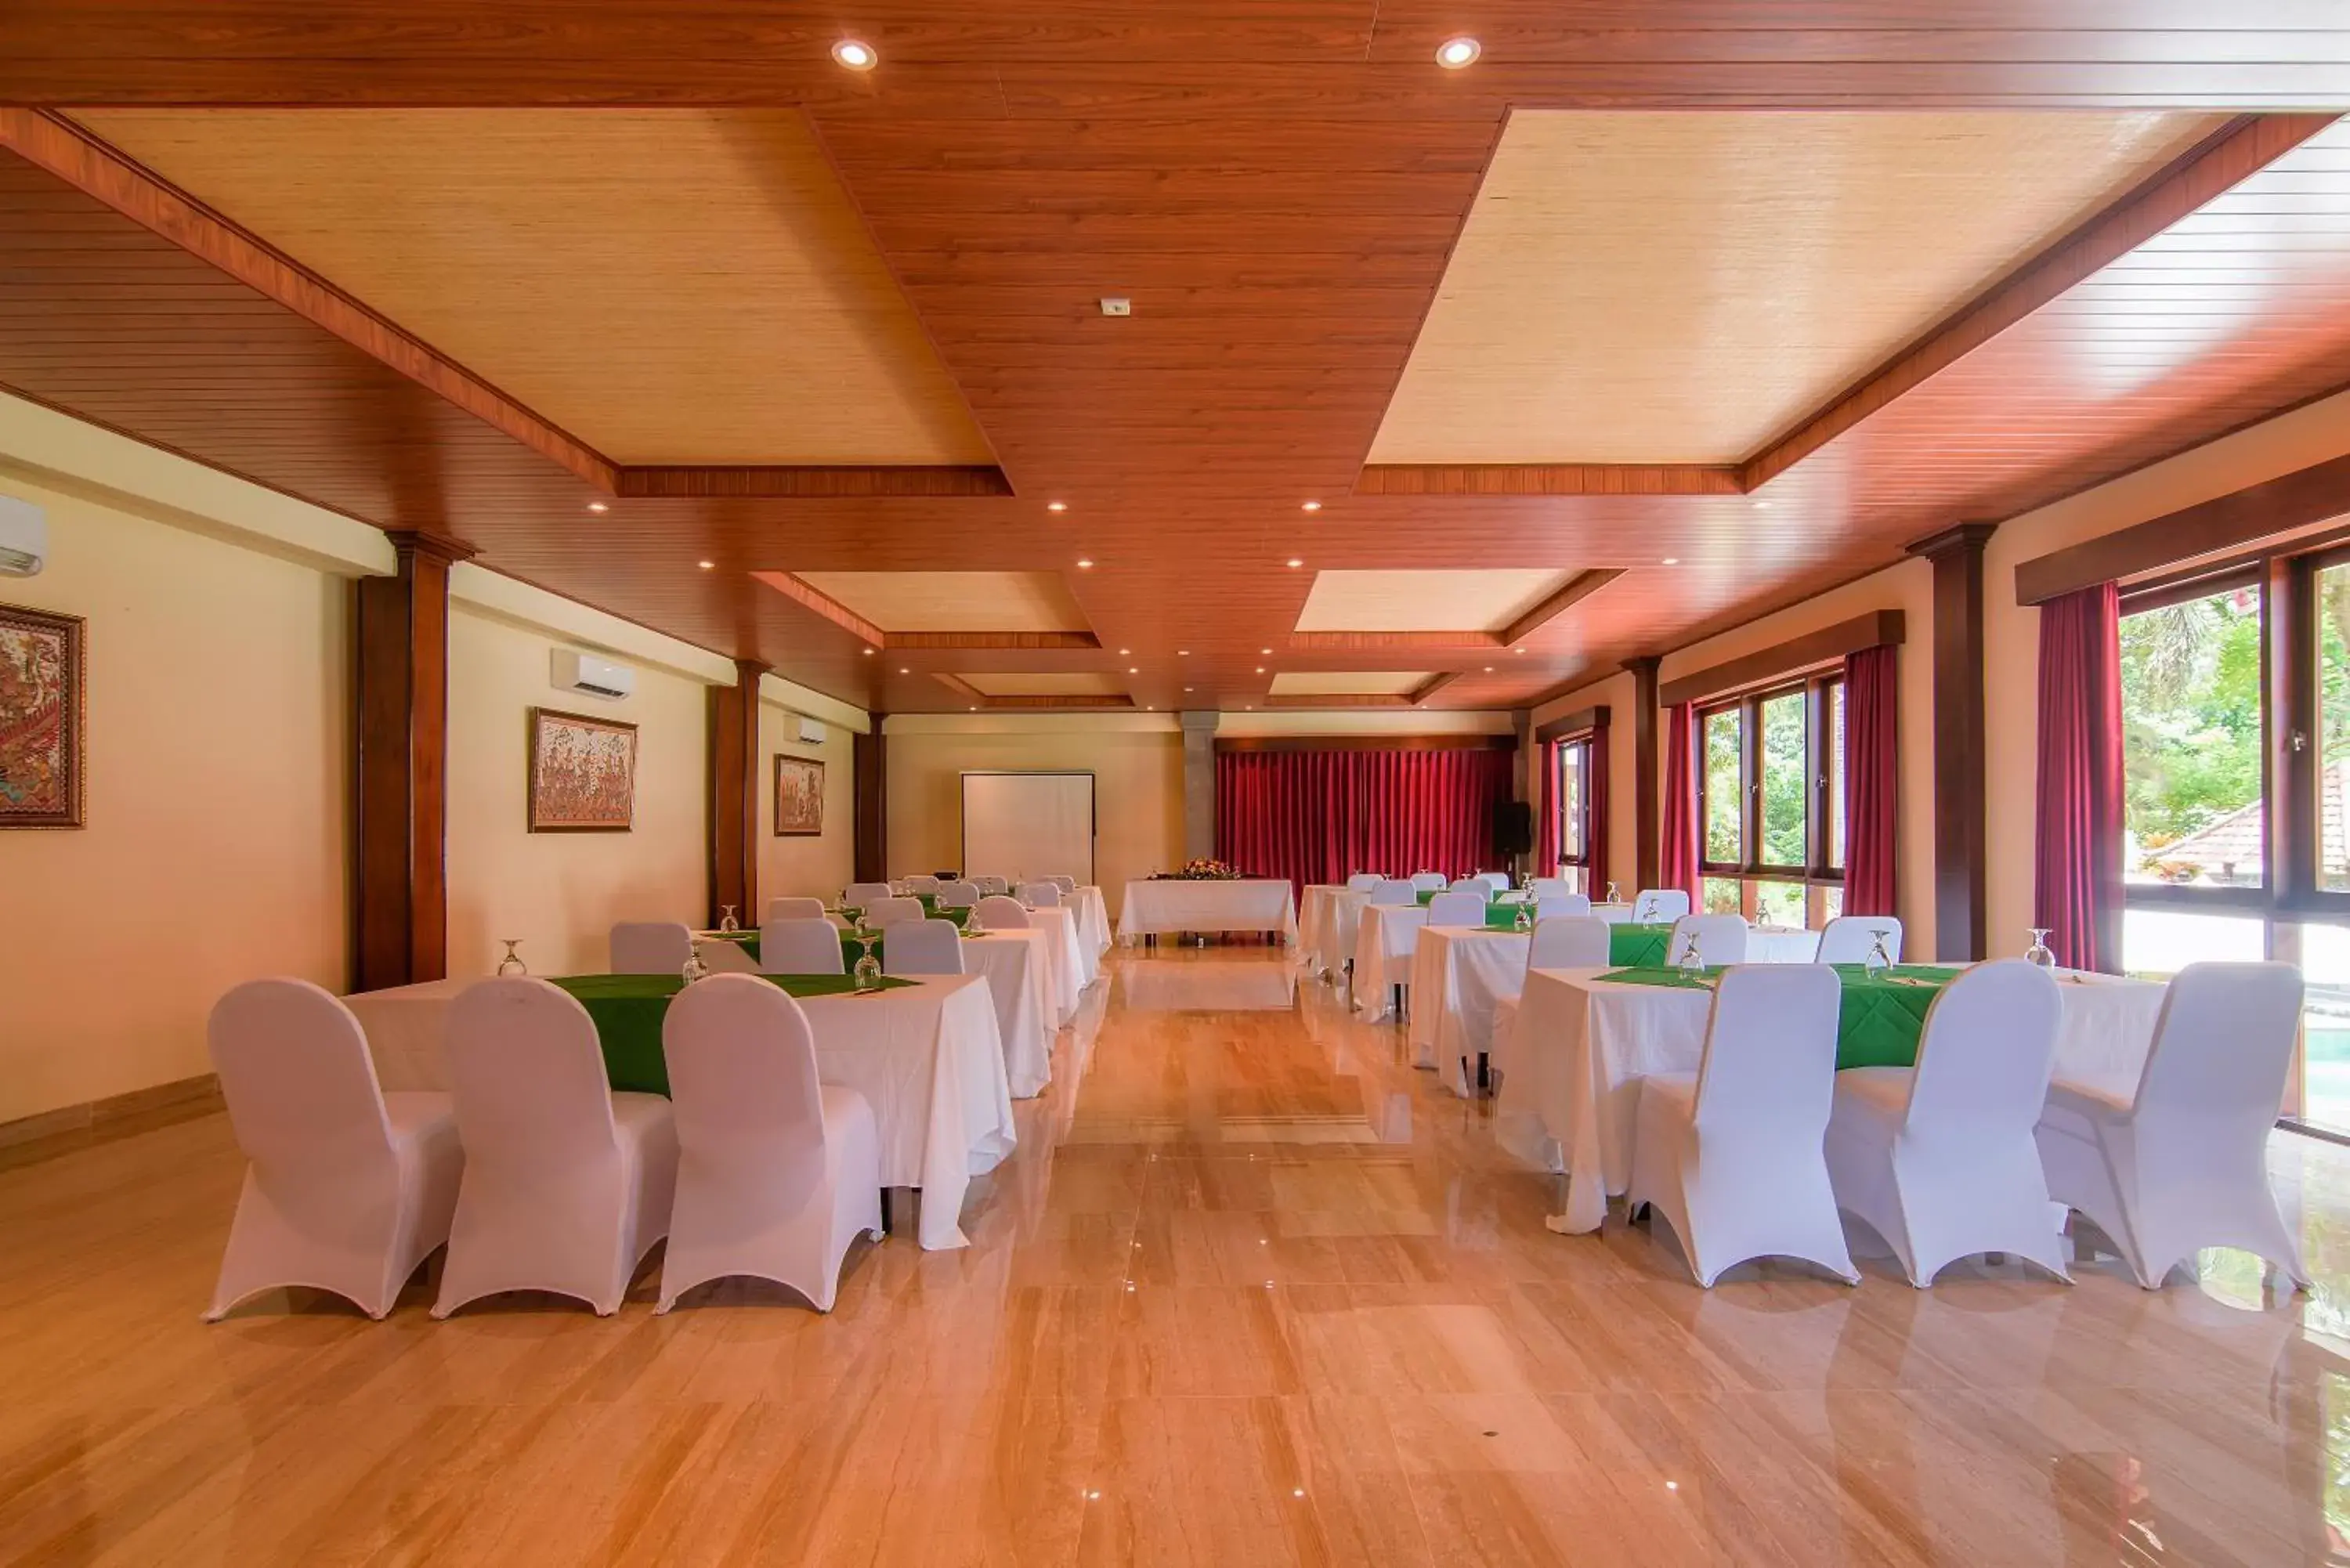 Meeting/conference room, Banquet Facilities in Champlung Sari Hotel and Spa Ubud